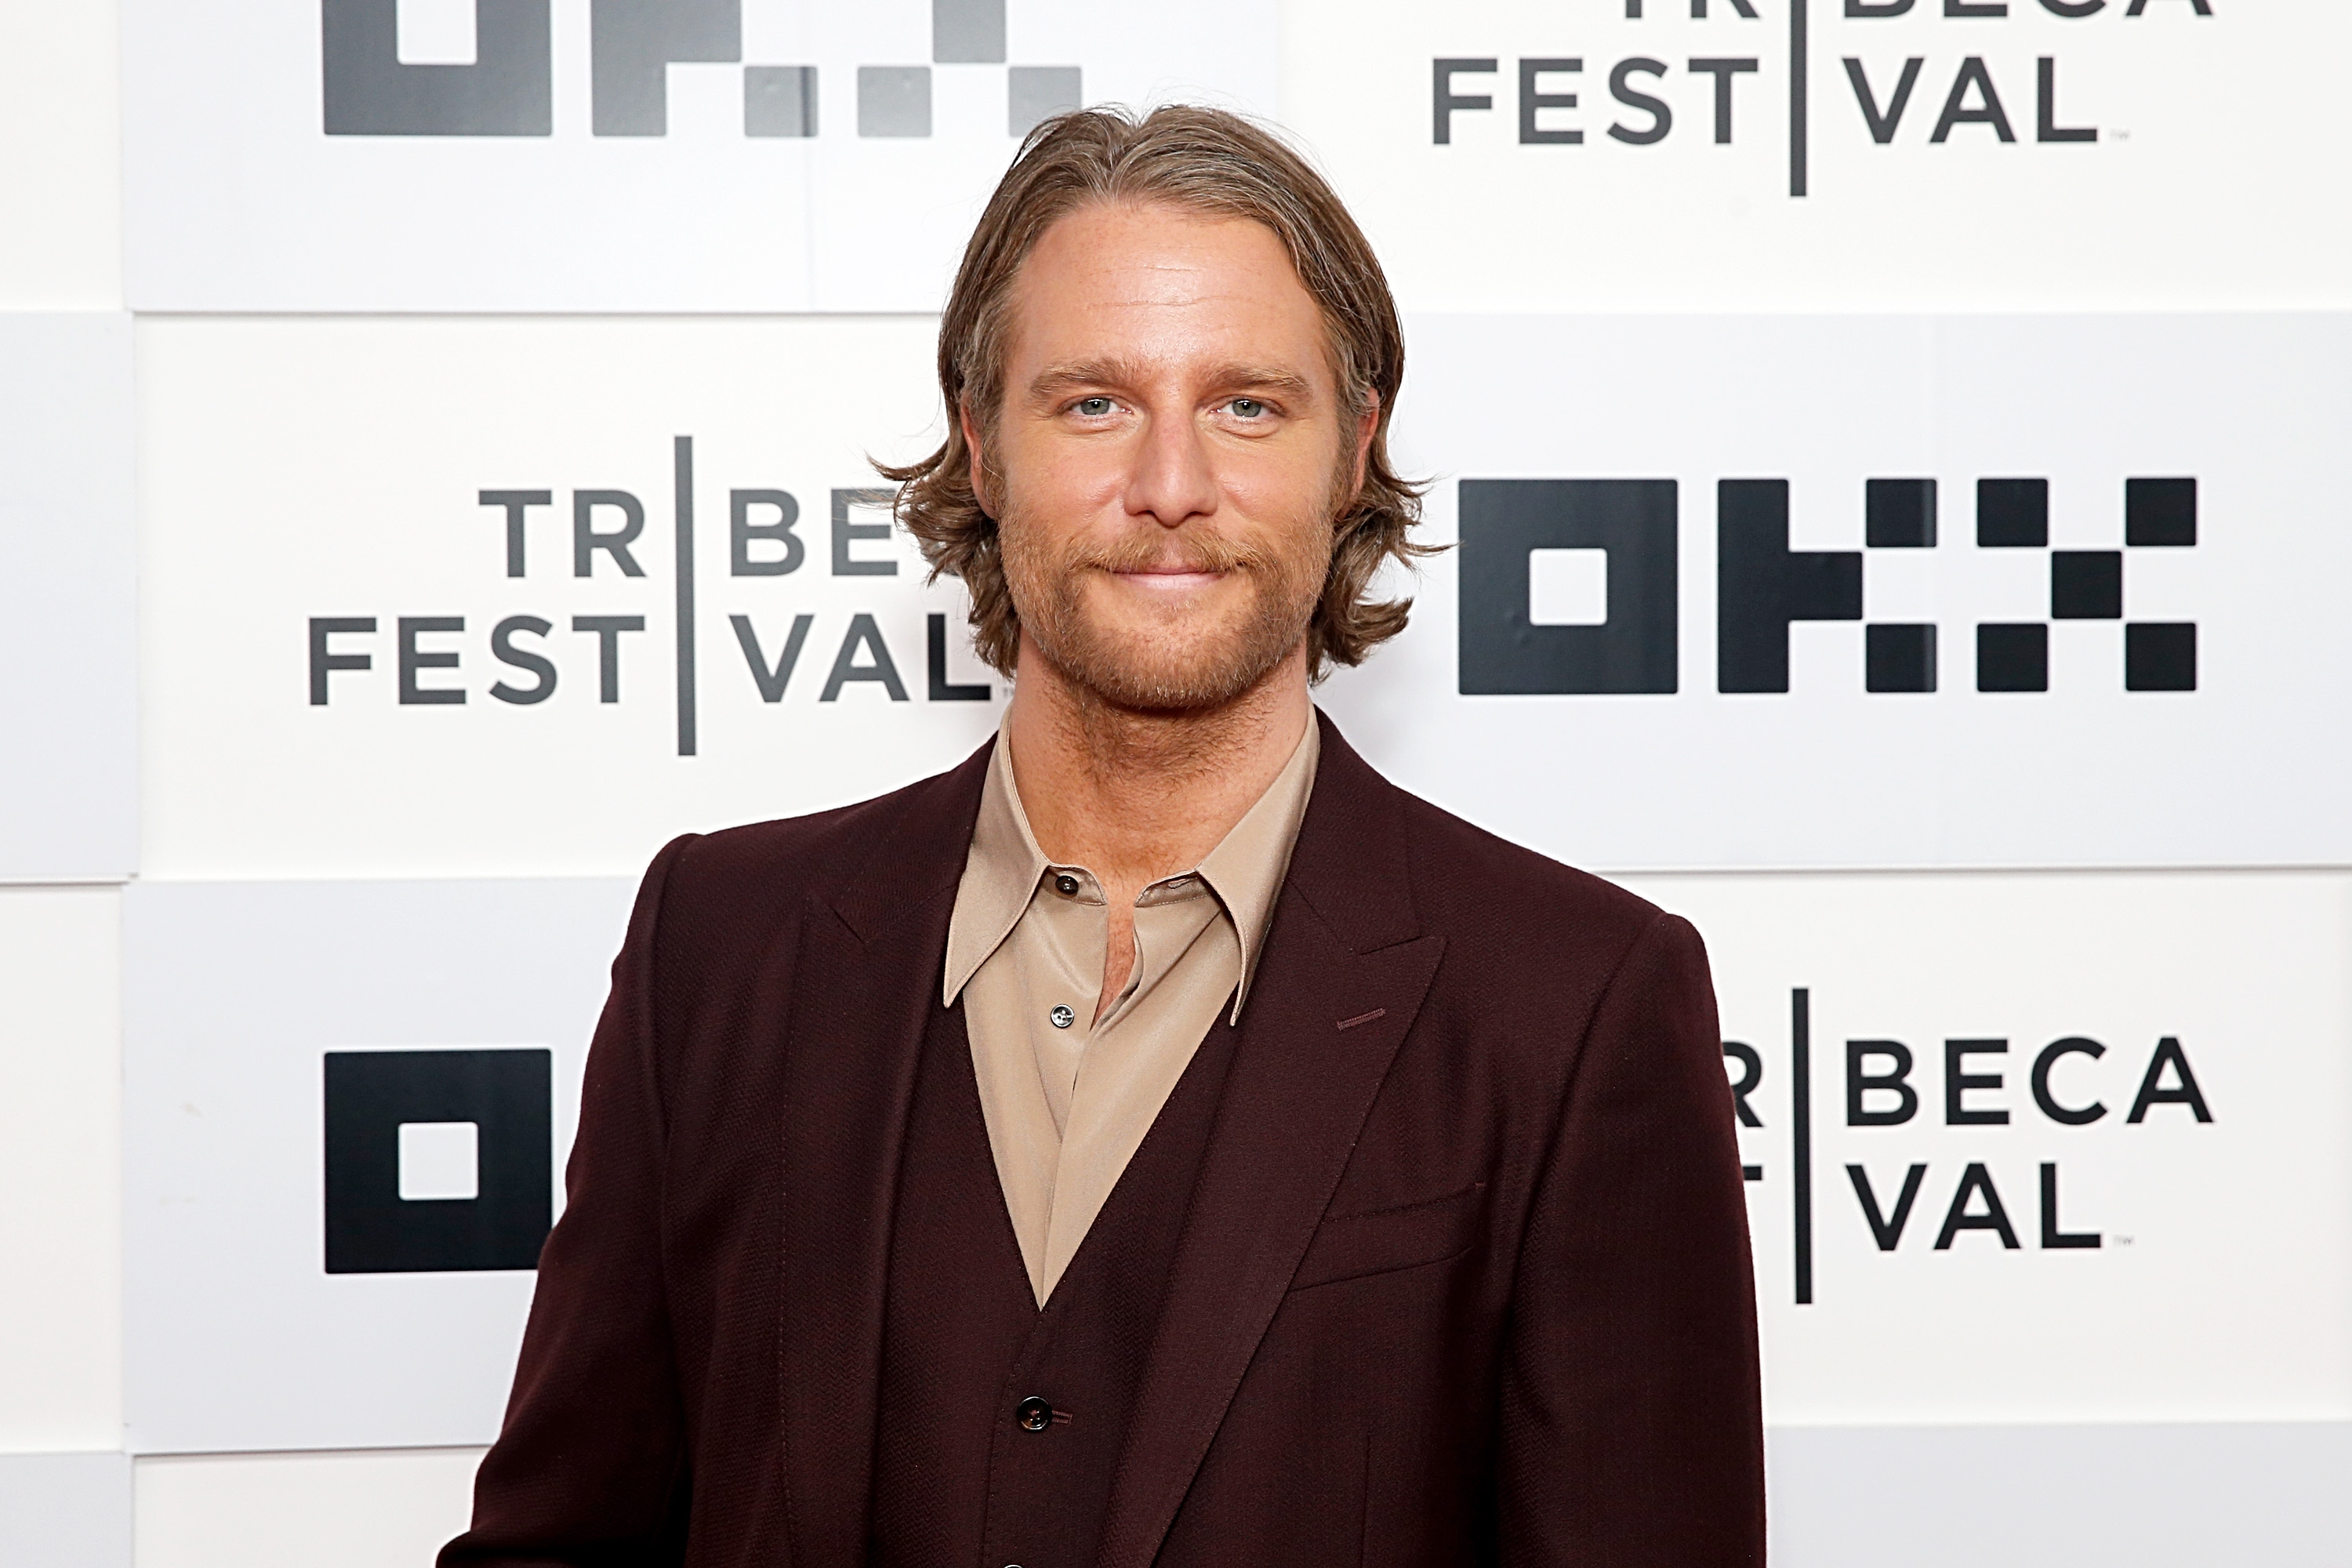 Jake McDorman at the 2022 Tribeca Festival in New York City. | Source: Getty Images